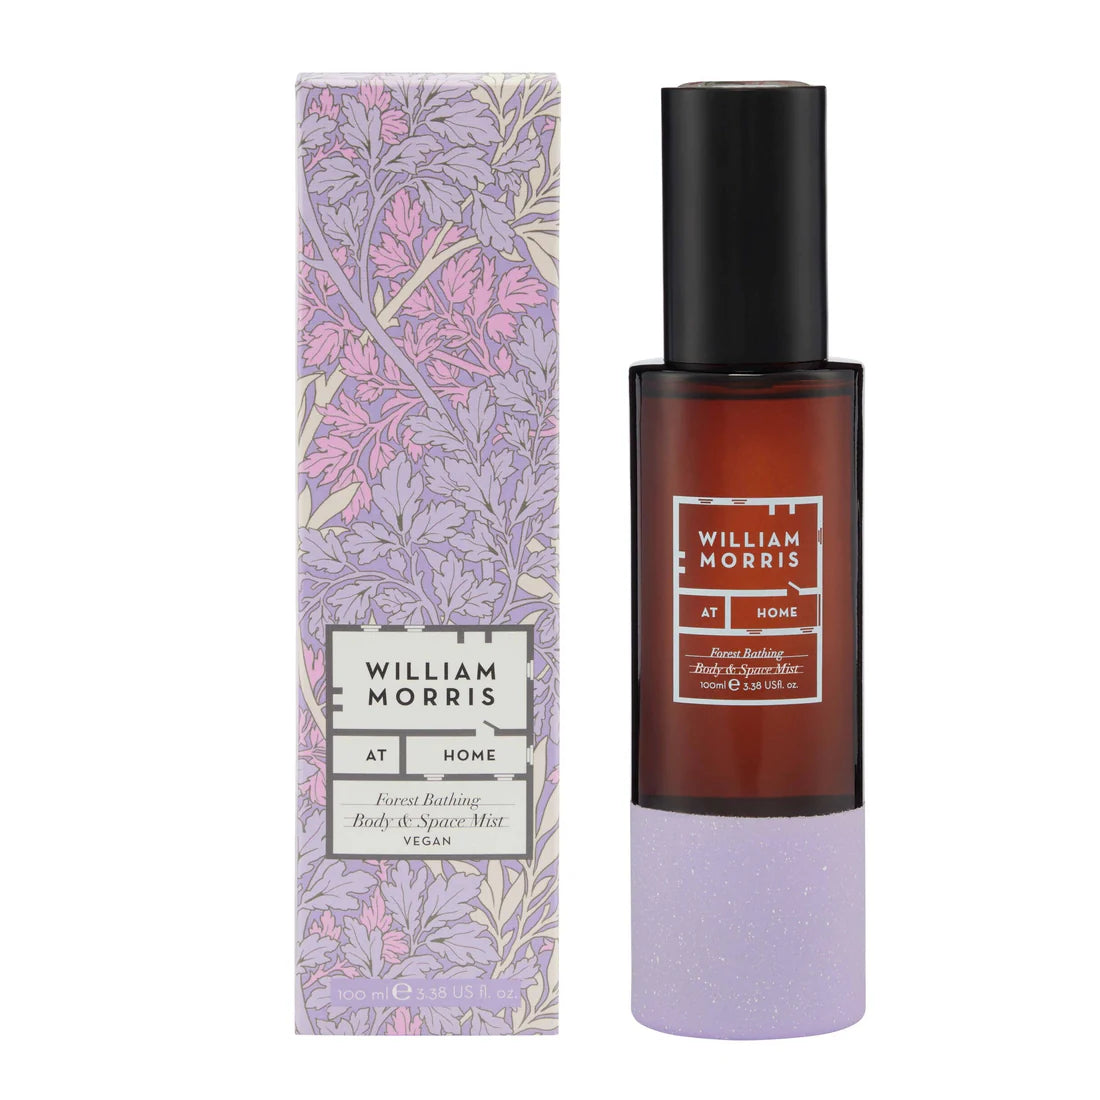 William Morris Forest Bathing Body & Space Mist